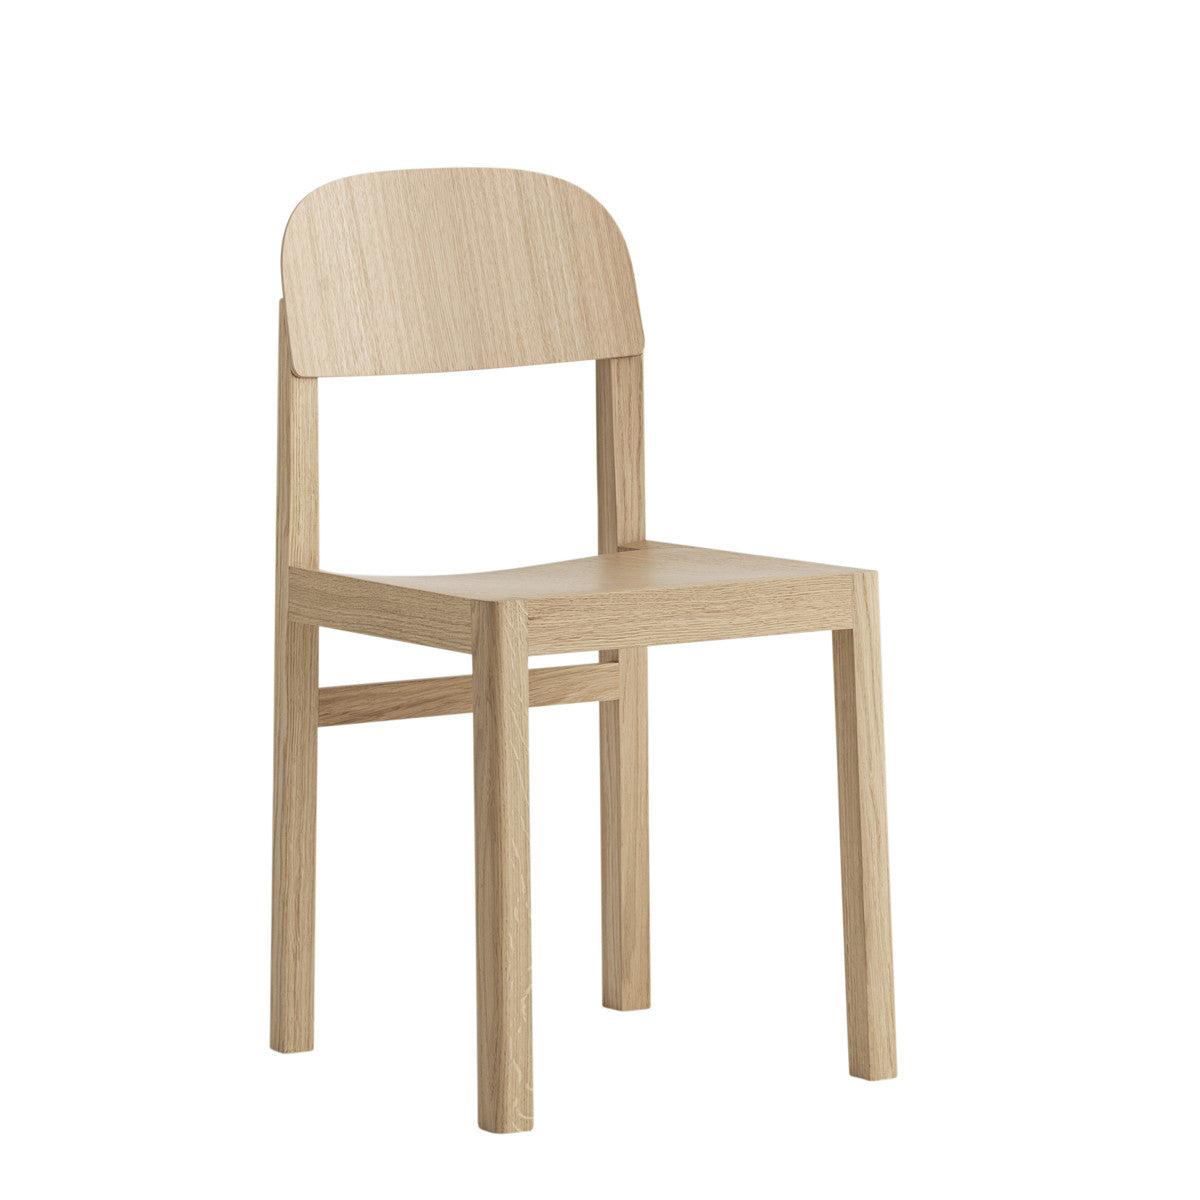 Clearance Workshop Chair / Natural Oak by Muuto